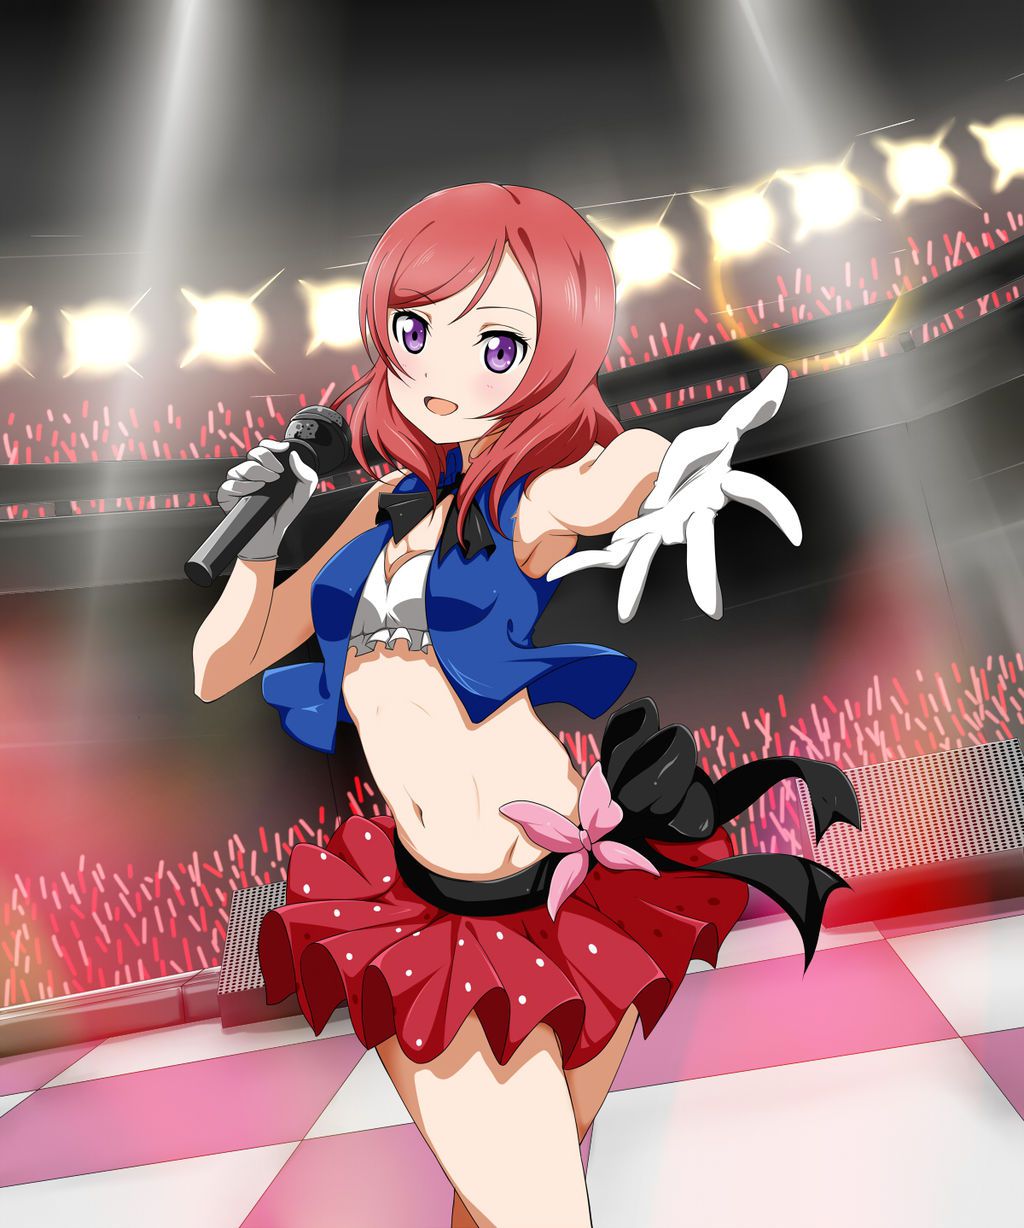 Pee on the Love Live! Erotic moe image of the Love Live performers 2 [2-d] 28